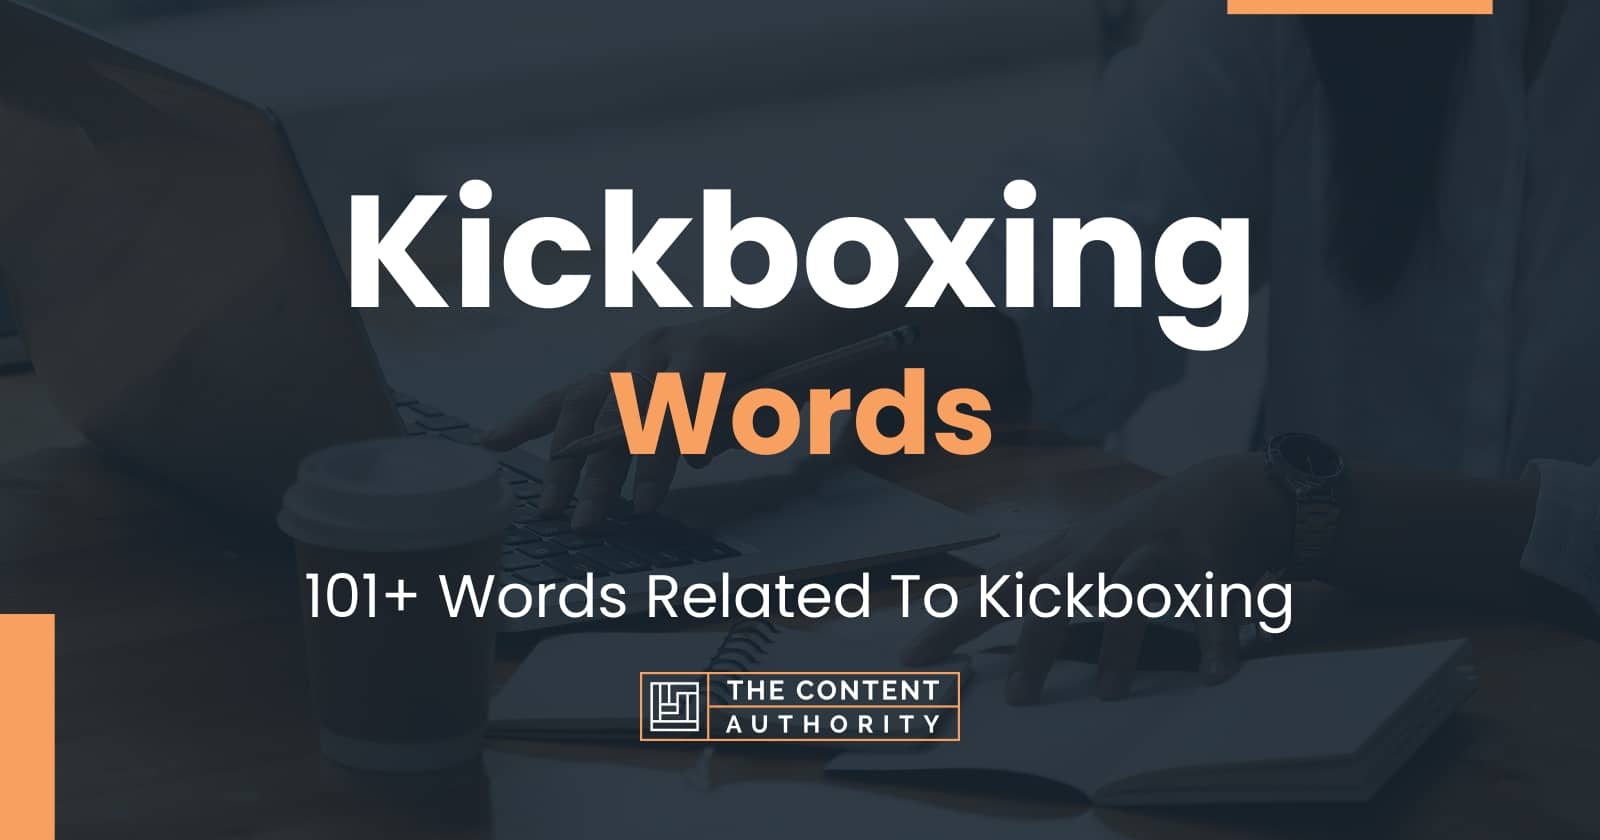 Words Related To Kickboxing 